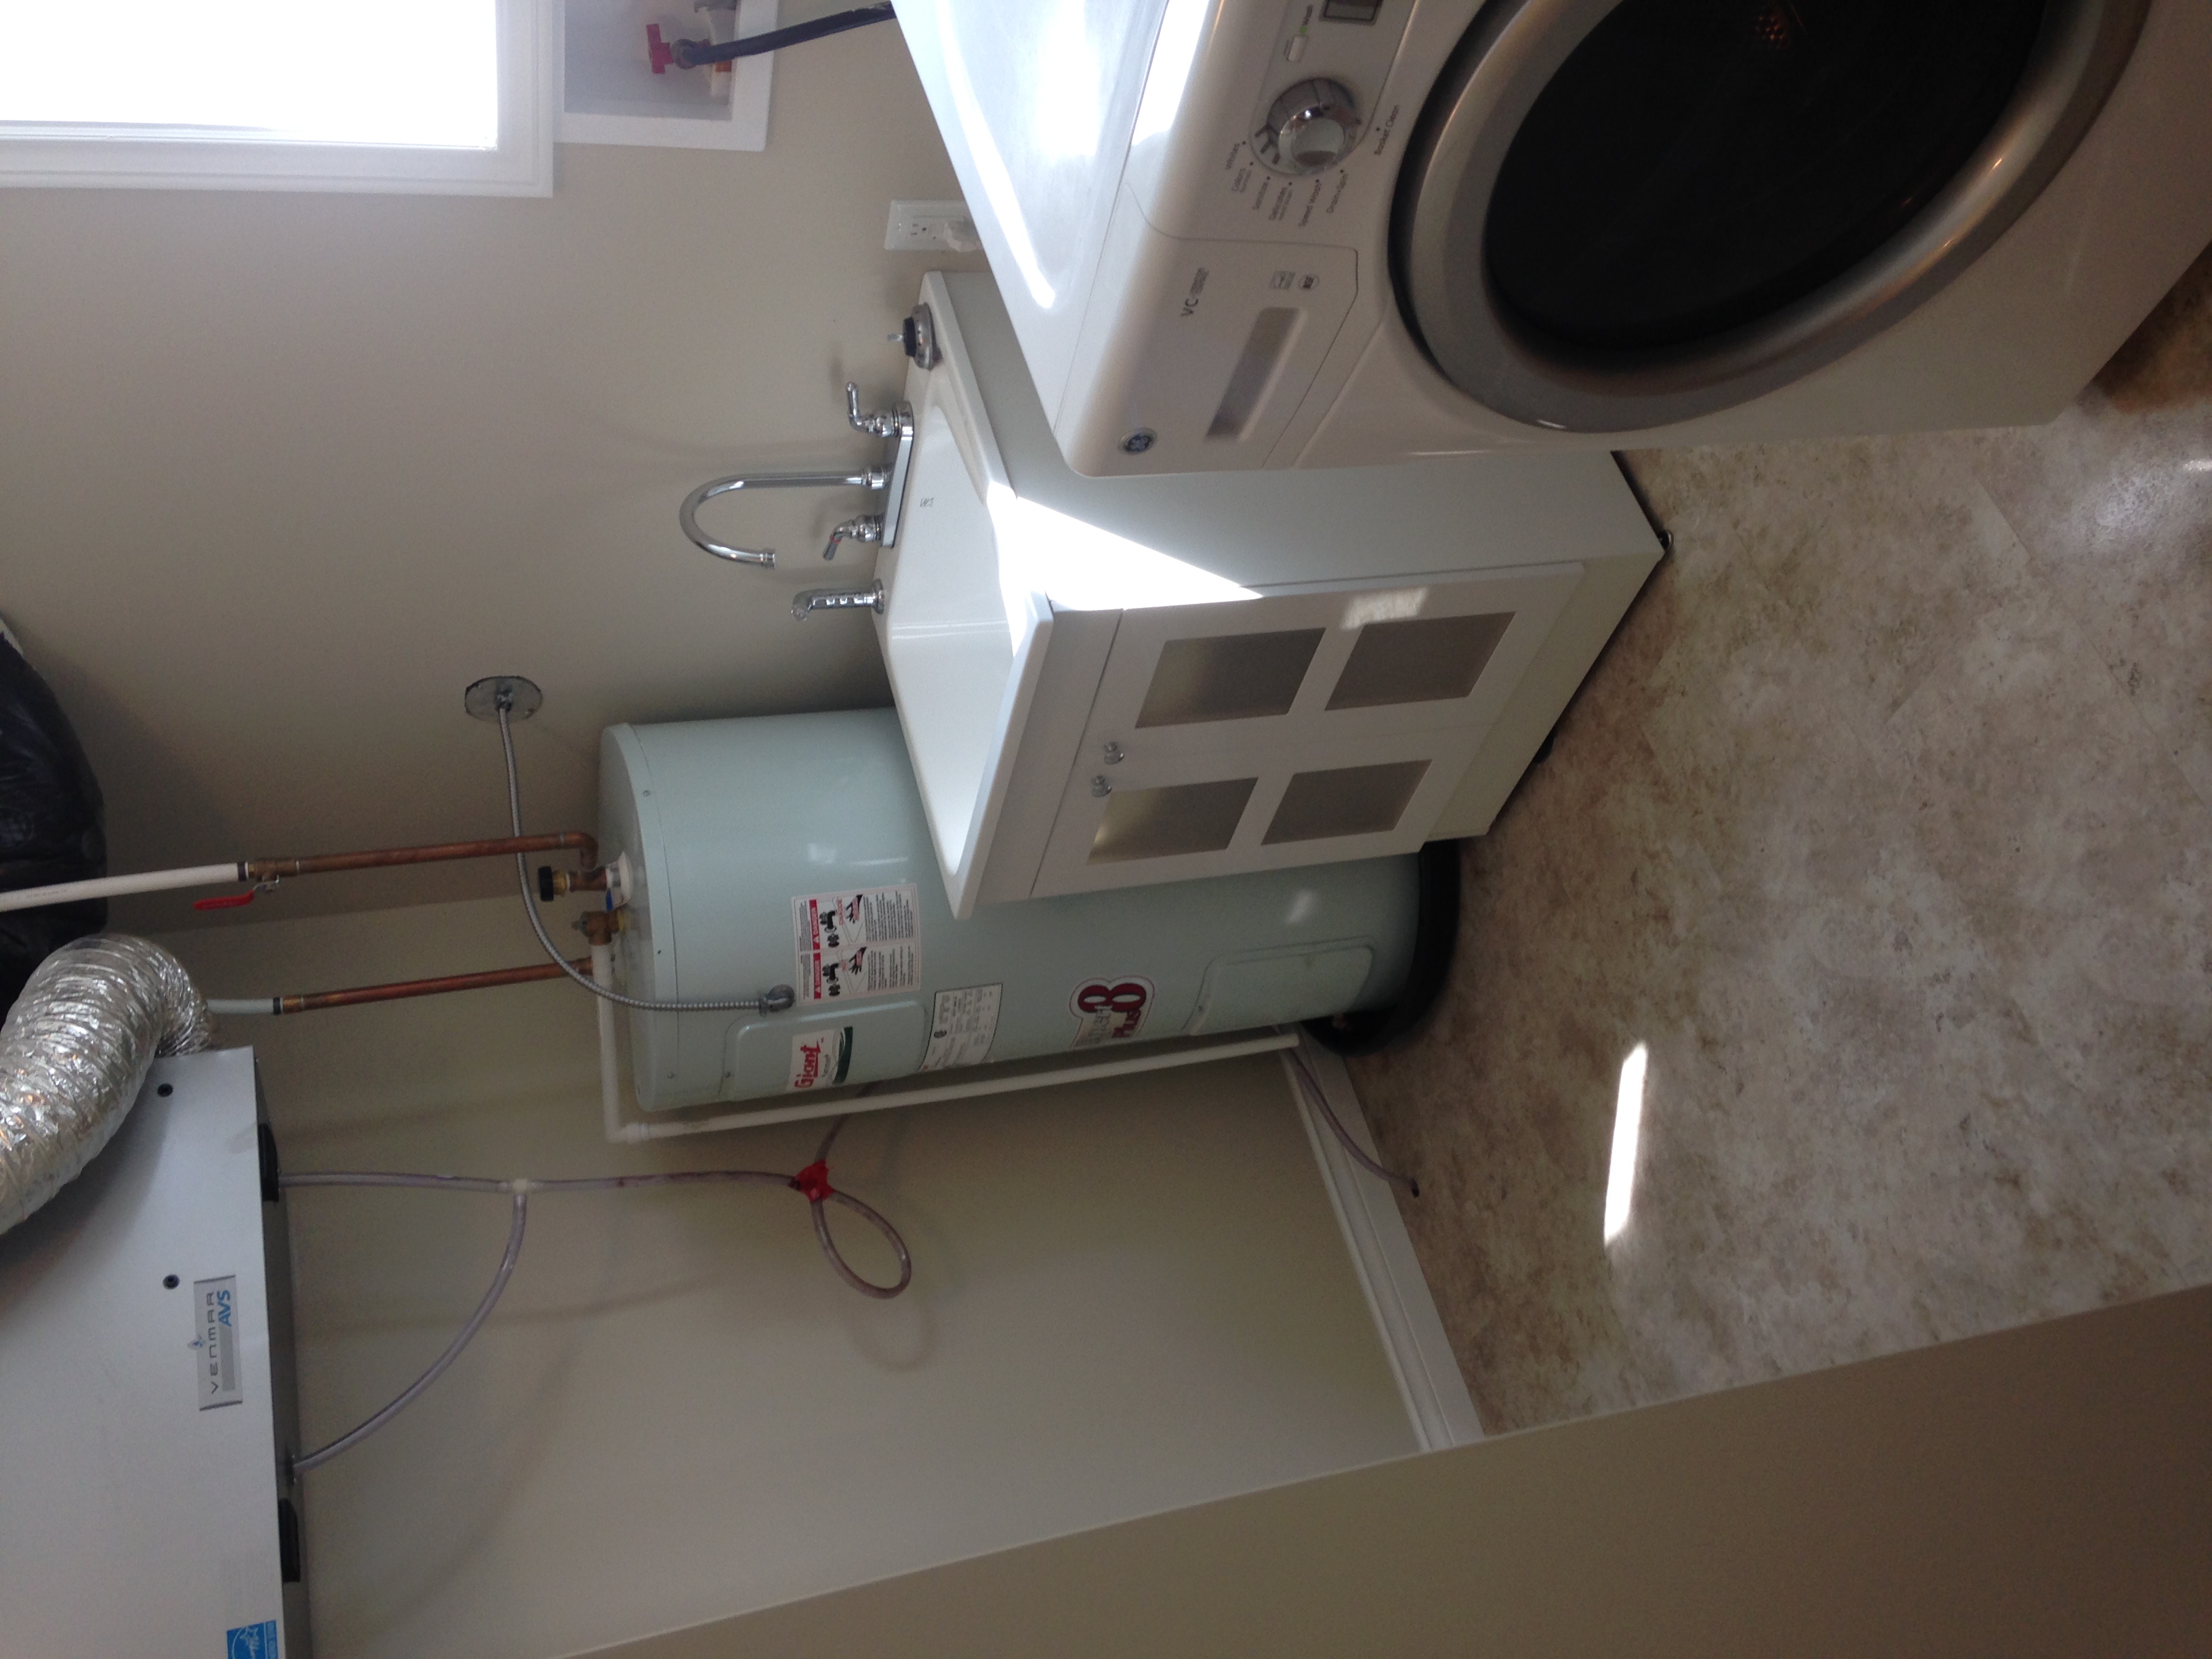 Laundry and utility room